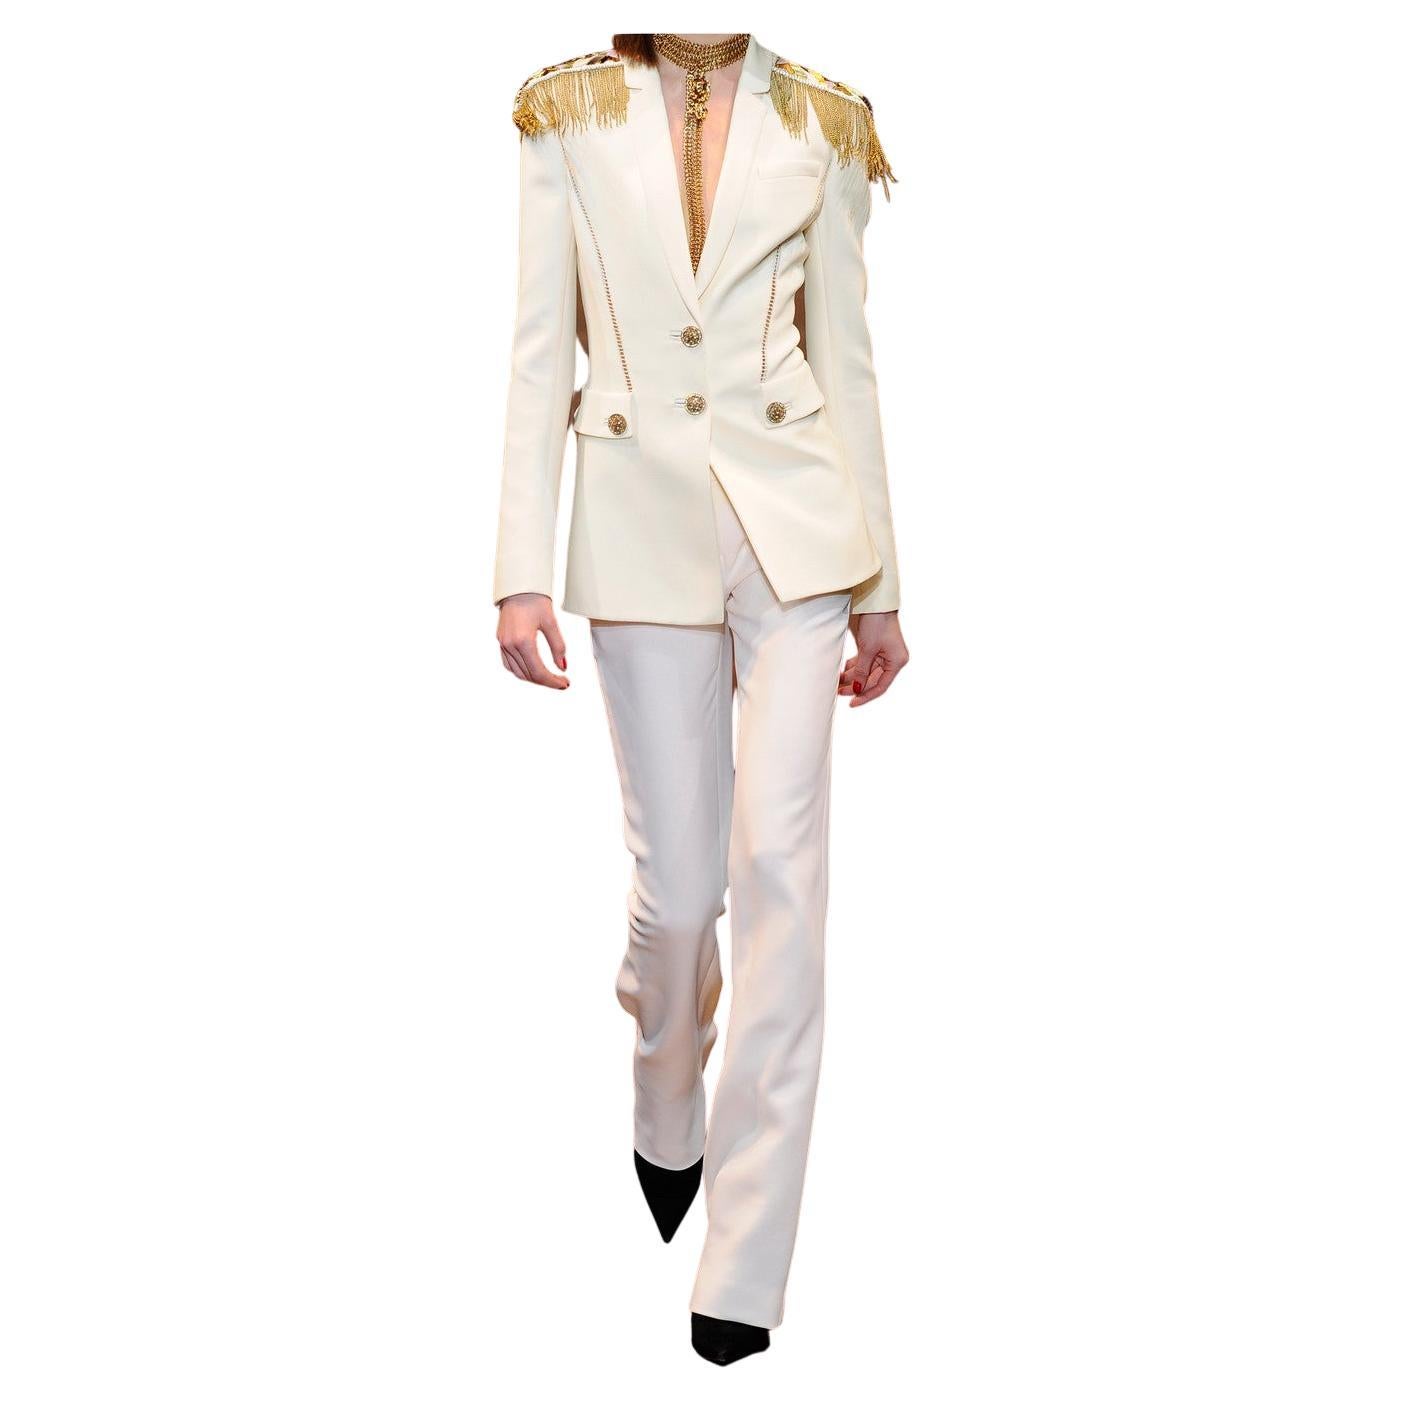 Versace Embellished silk-crepe Pant Suit Size 42 - 6 NWT For Sale